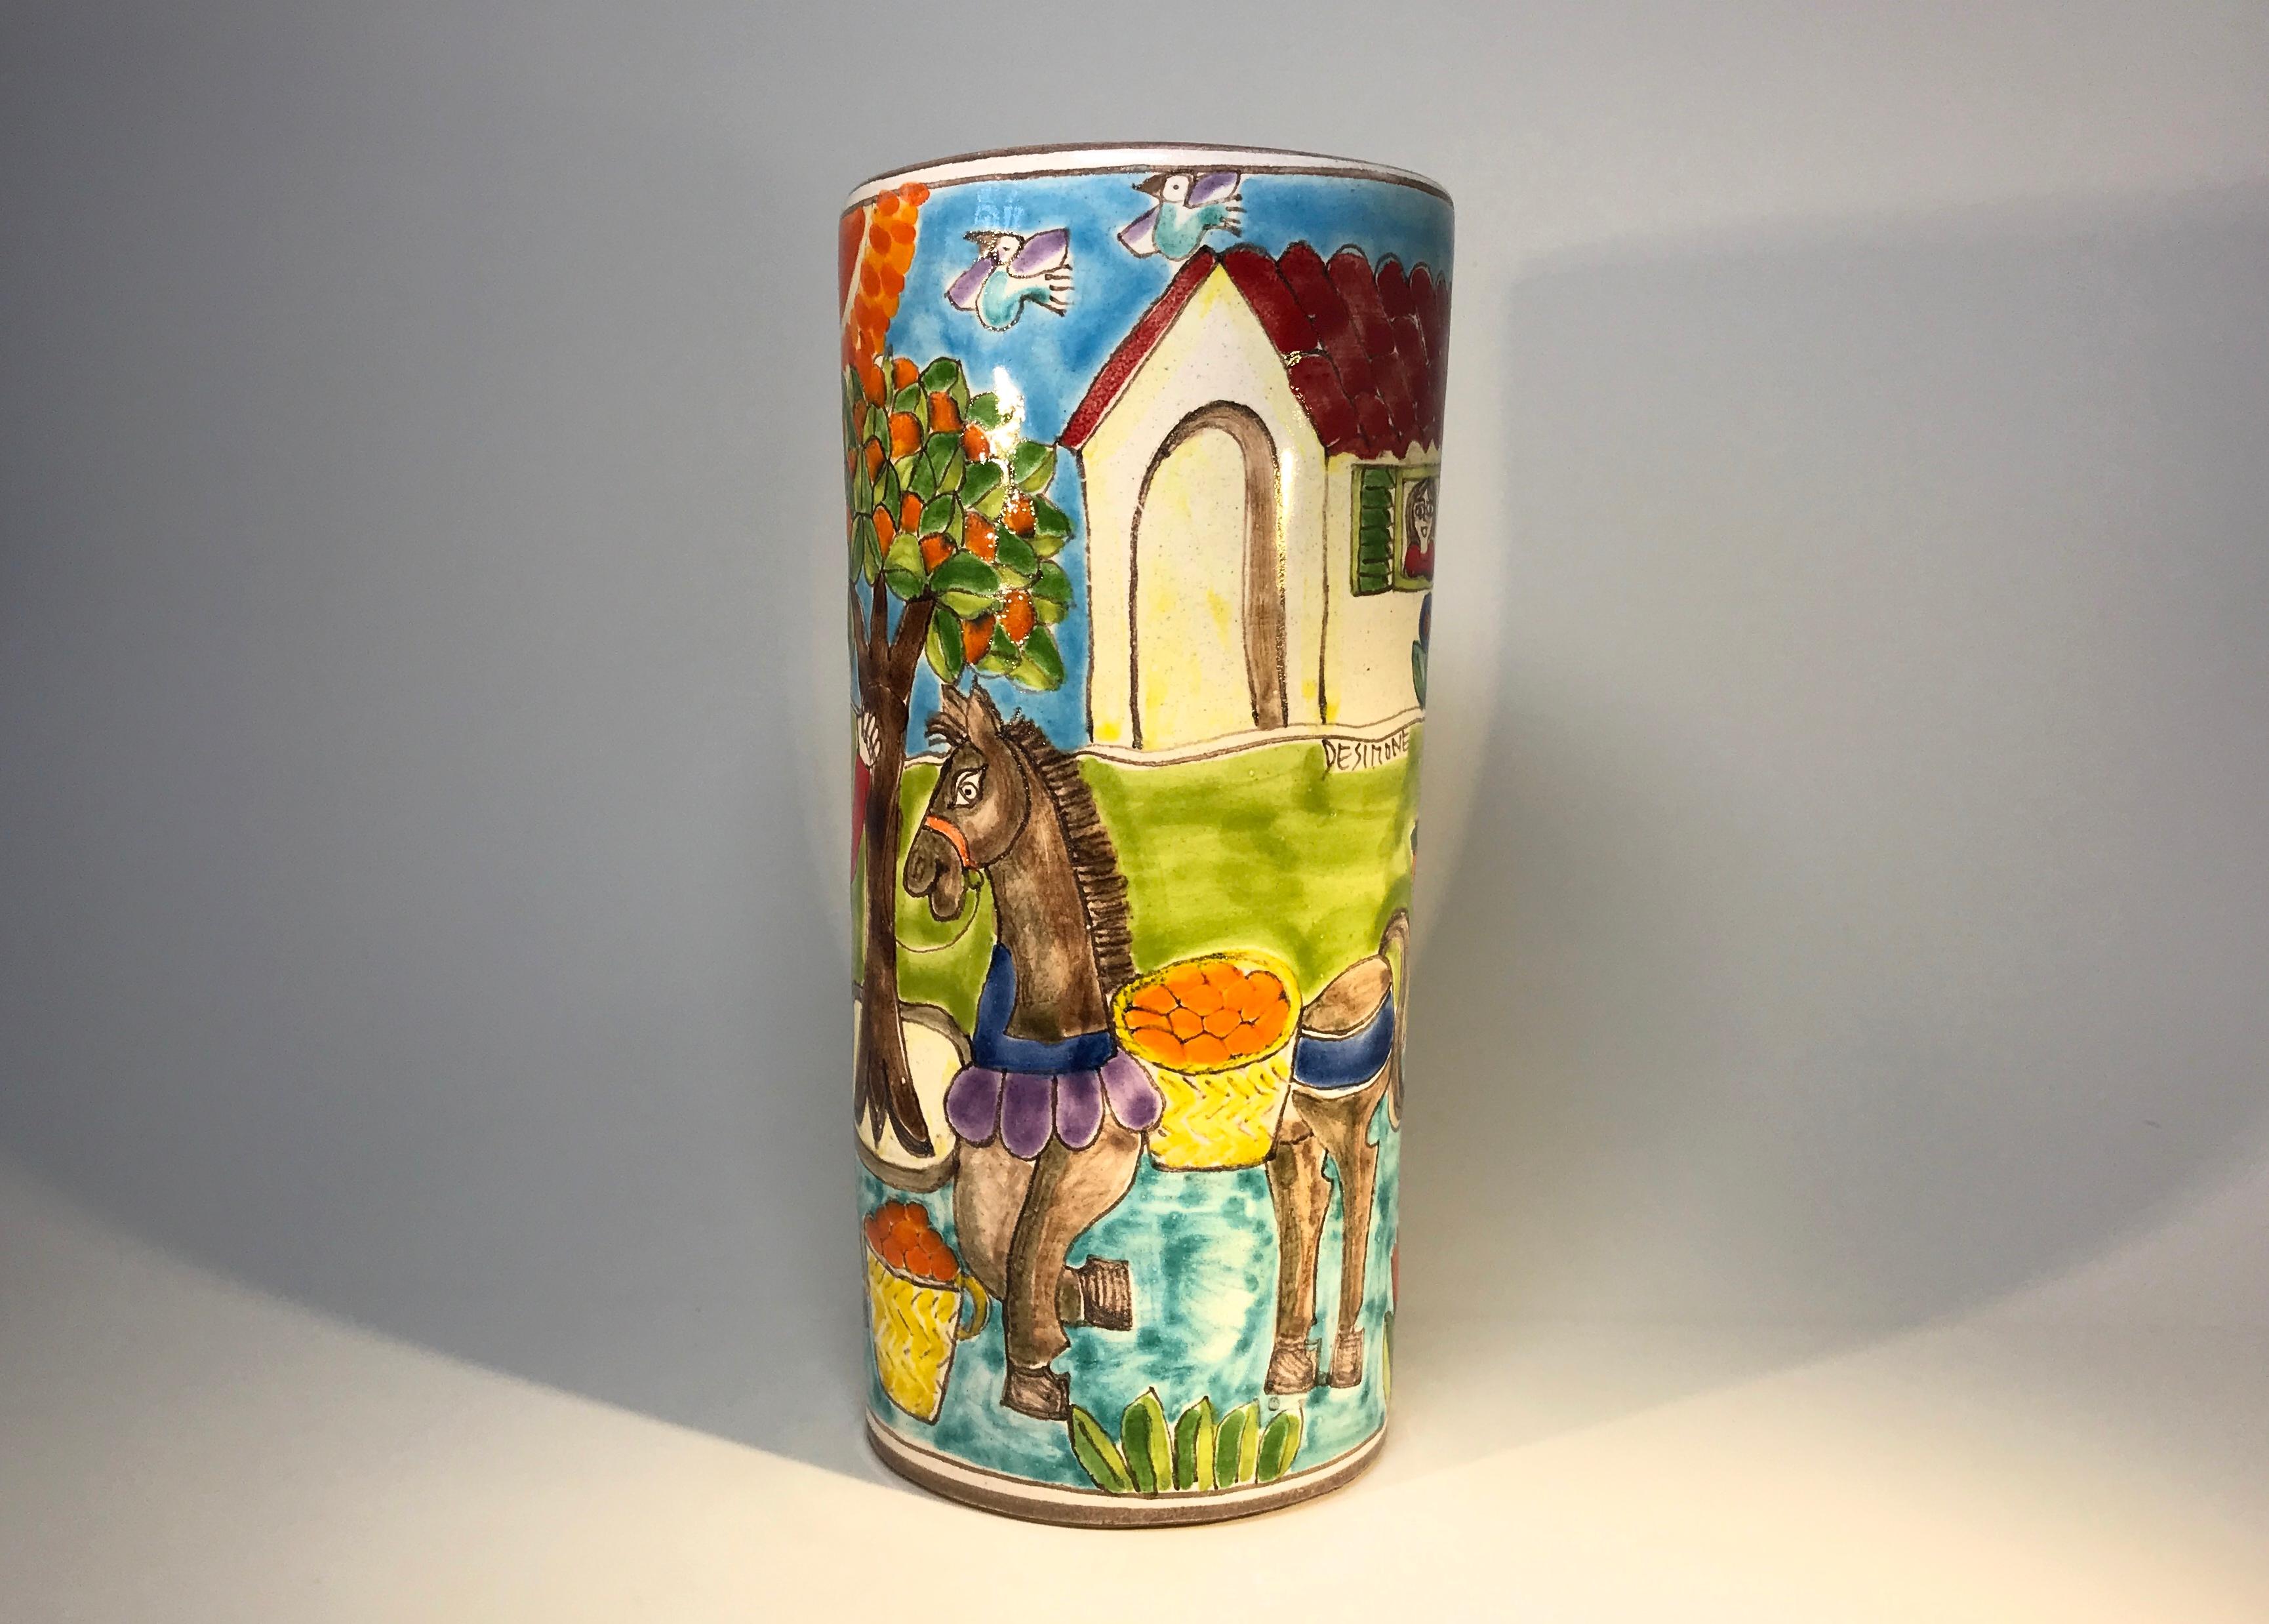 Original and signed by Giovanni DeSimone, this hand painted vase is full of vibrant colors depicting 'Italian Village Life'
A fabulous and fun piece demonstrating Giovanni's creativeness and wonderful sense of humour
Signed to front by Giovanni